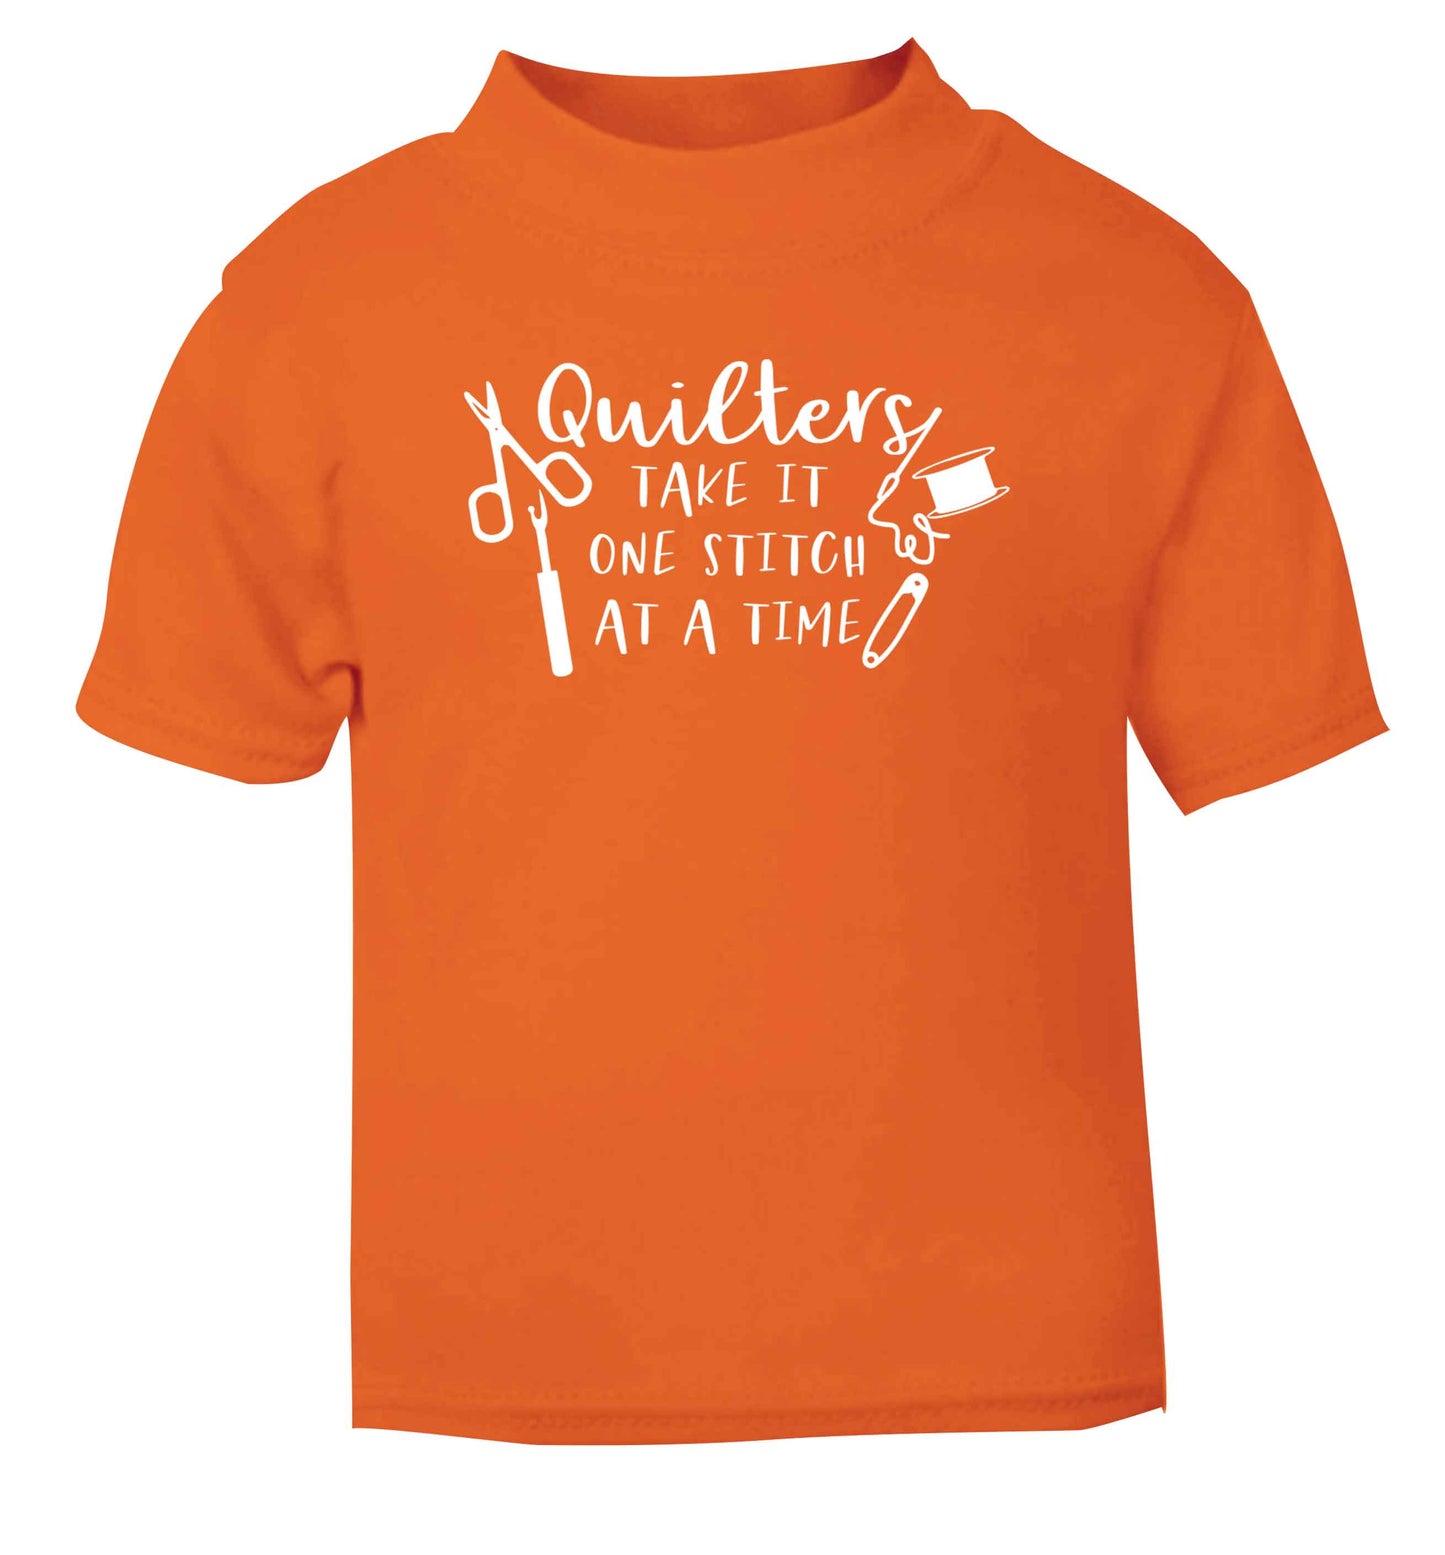 Quilters take it one stitch at a time  orange Baby Toddler Tshirt 2 Years